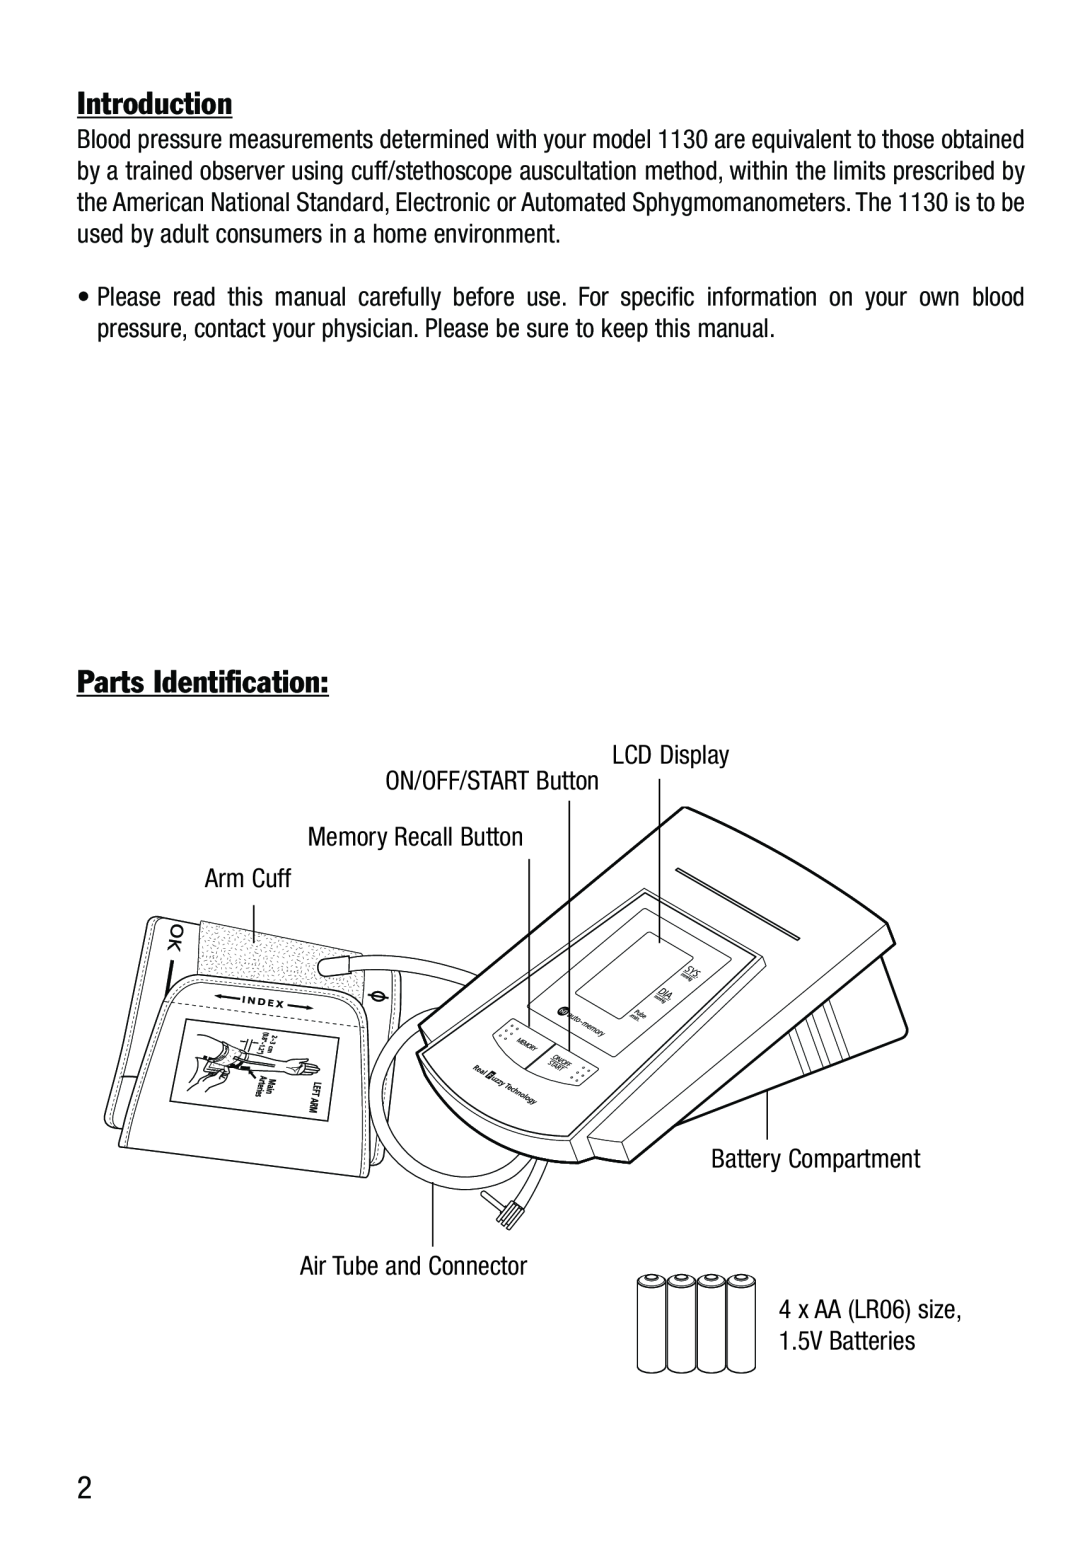 Lumiscope 1130 specifications Introduction, Parts Identification 